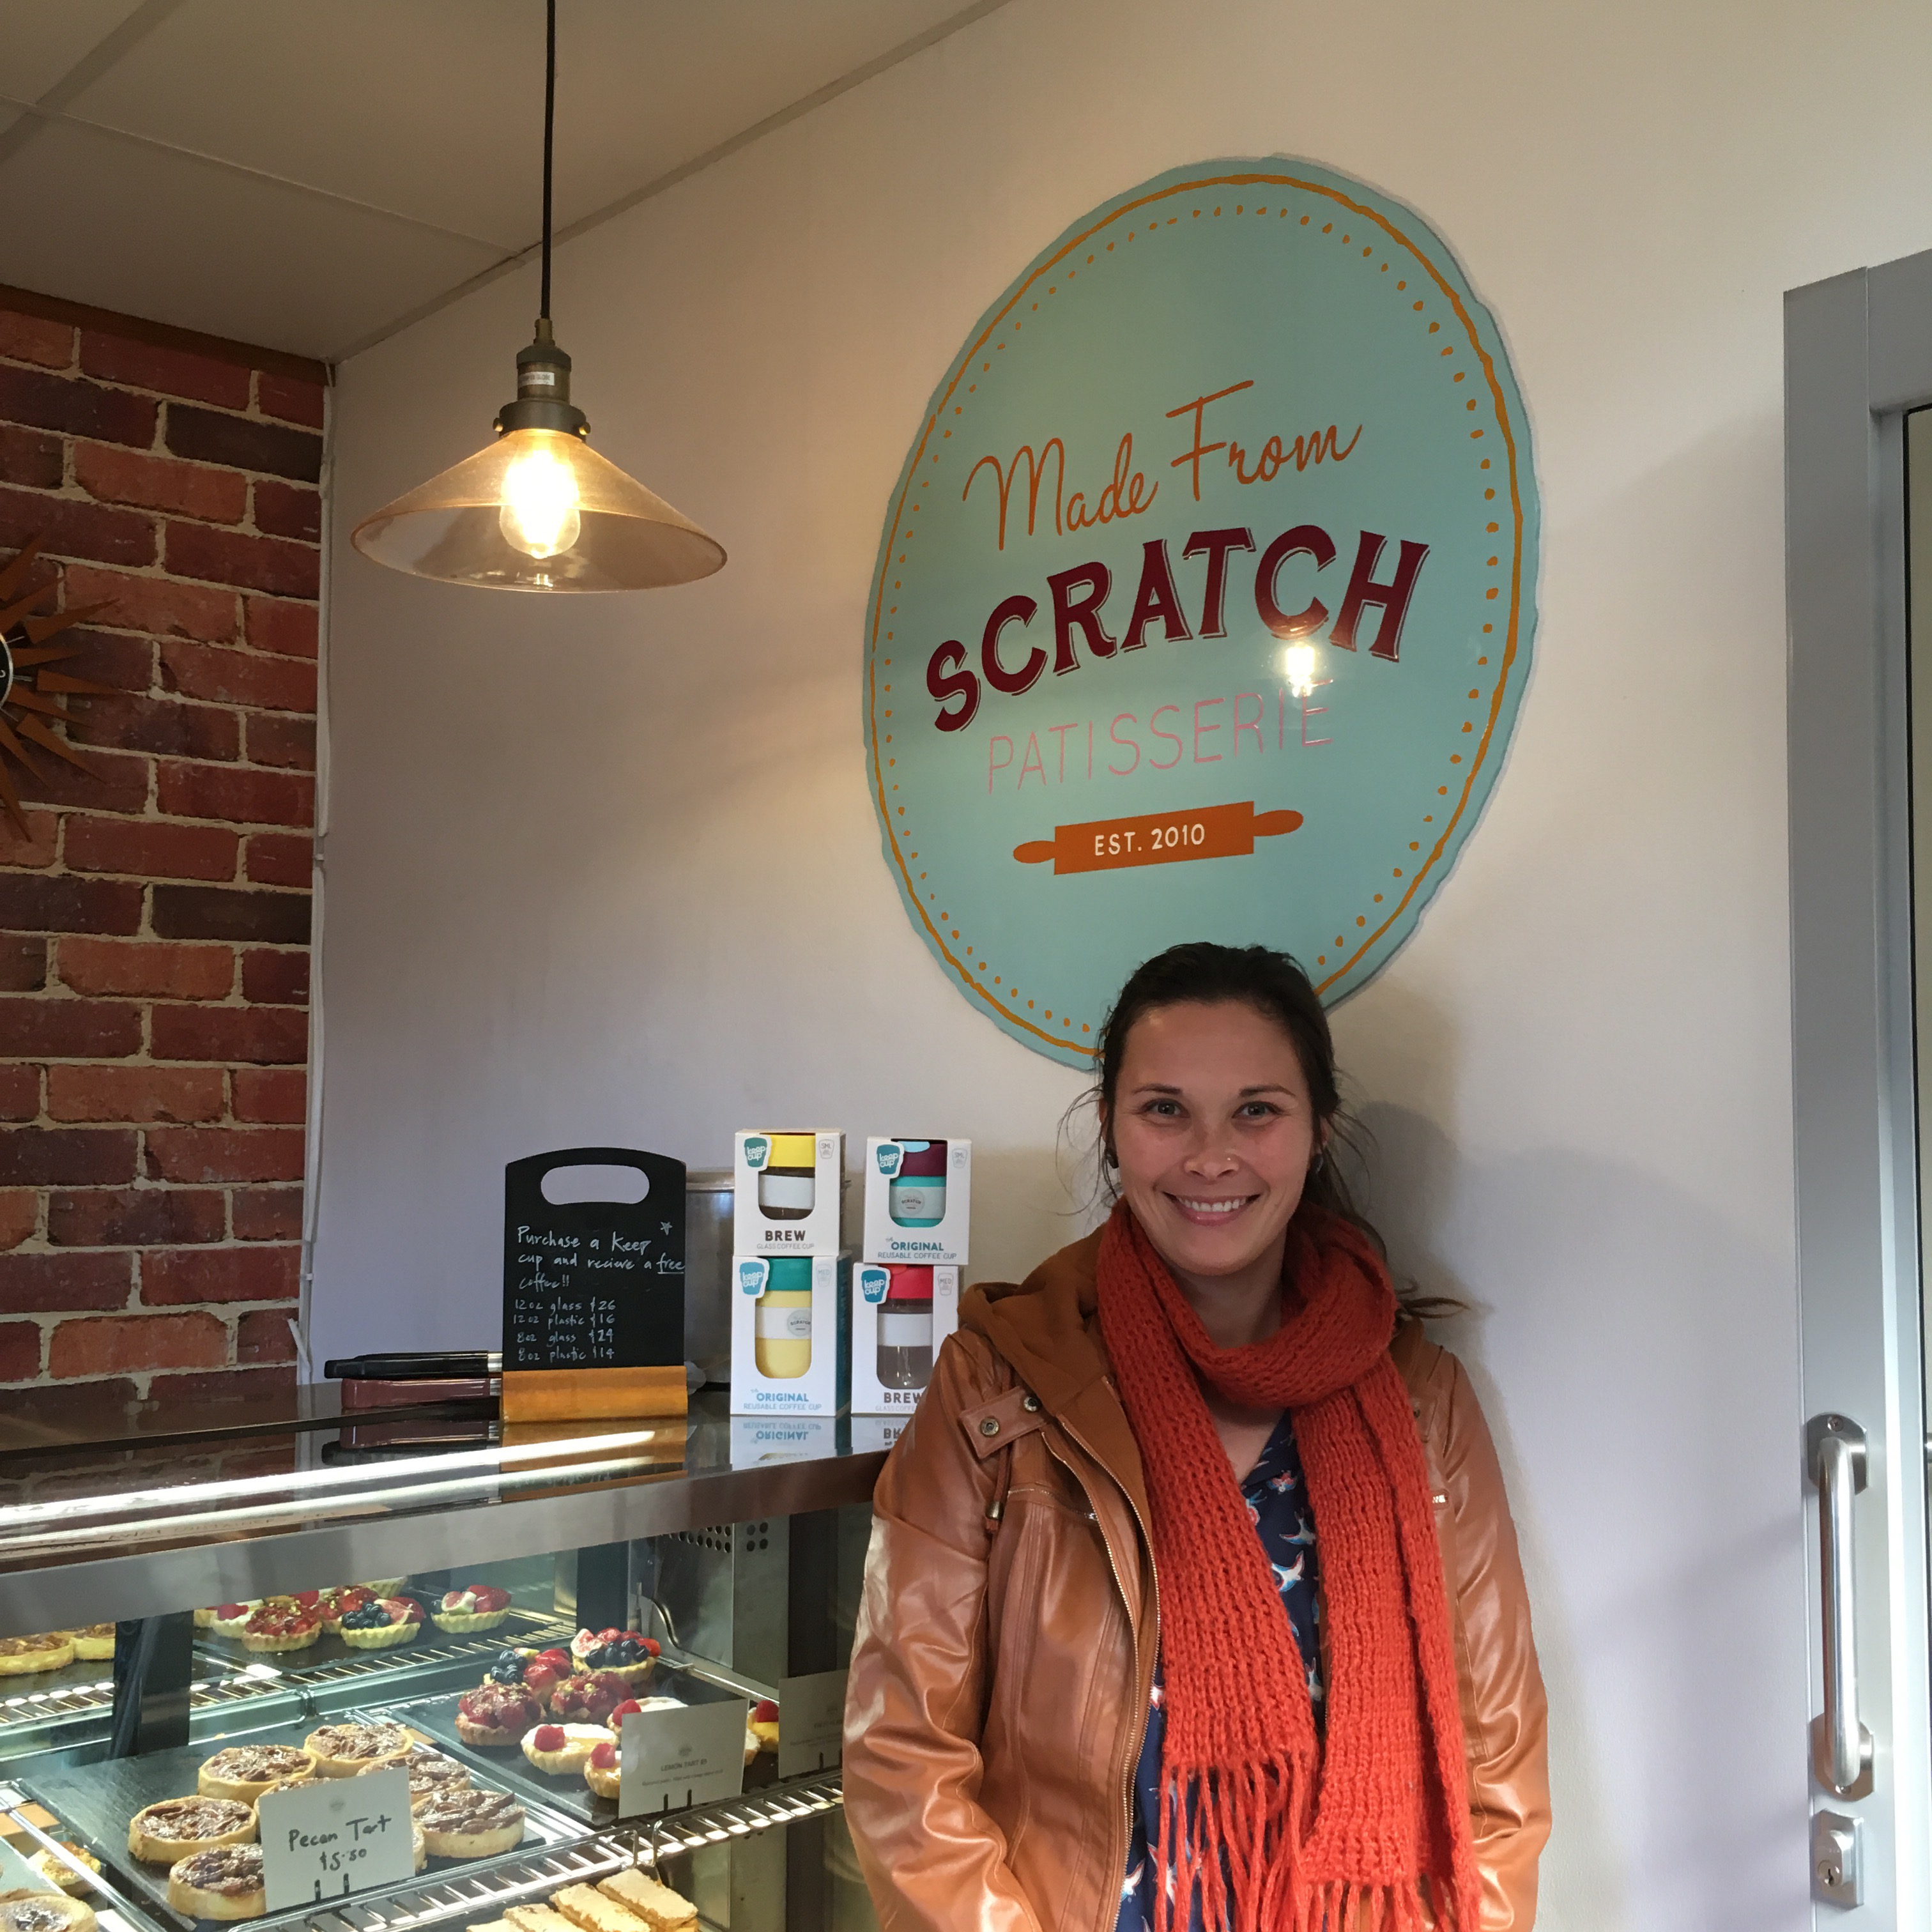 Scratch Patisserie join Responsible Cafes and incentivise reuse by donating to the Red Cross